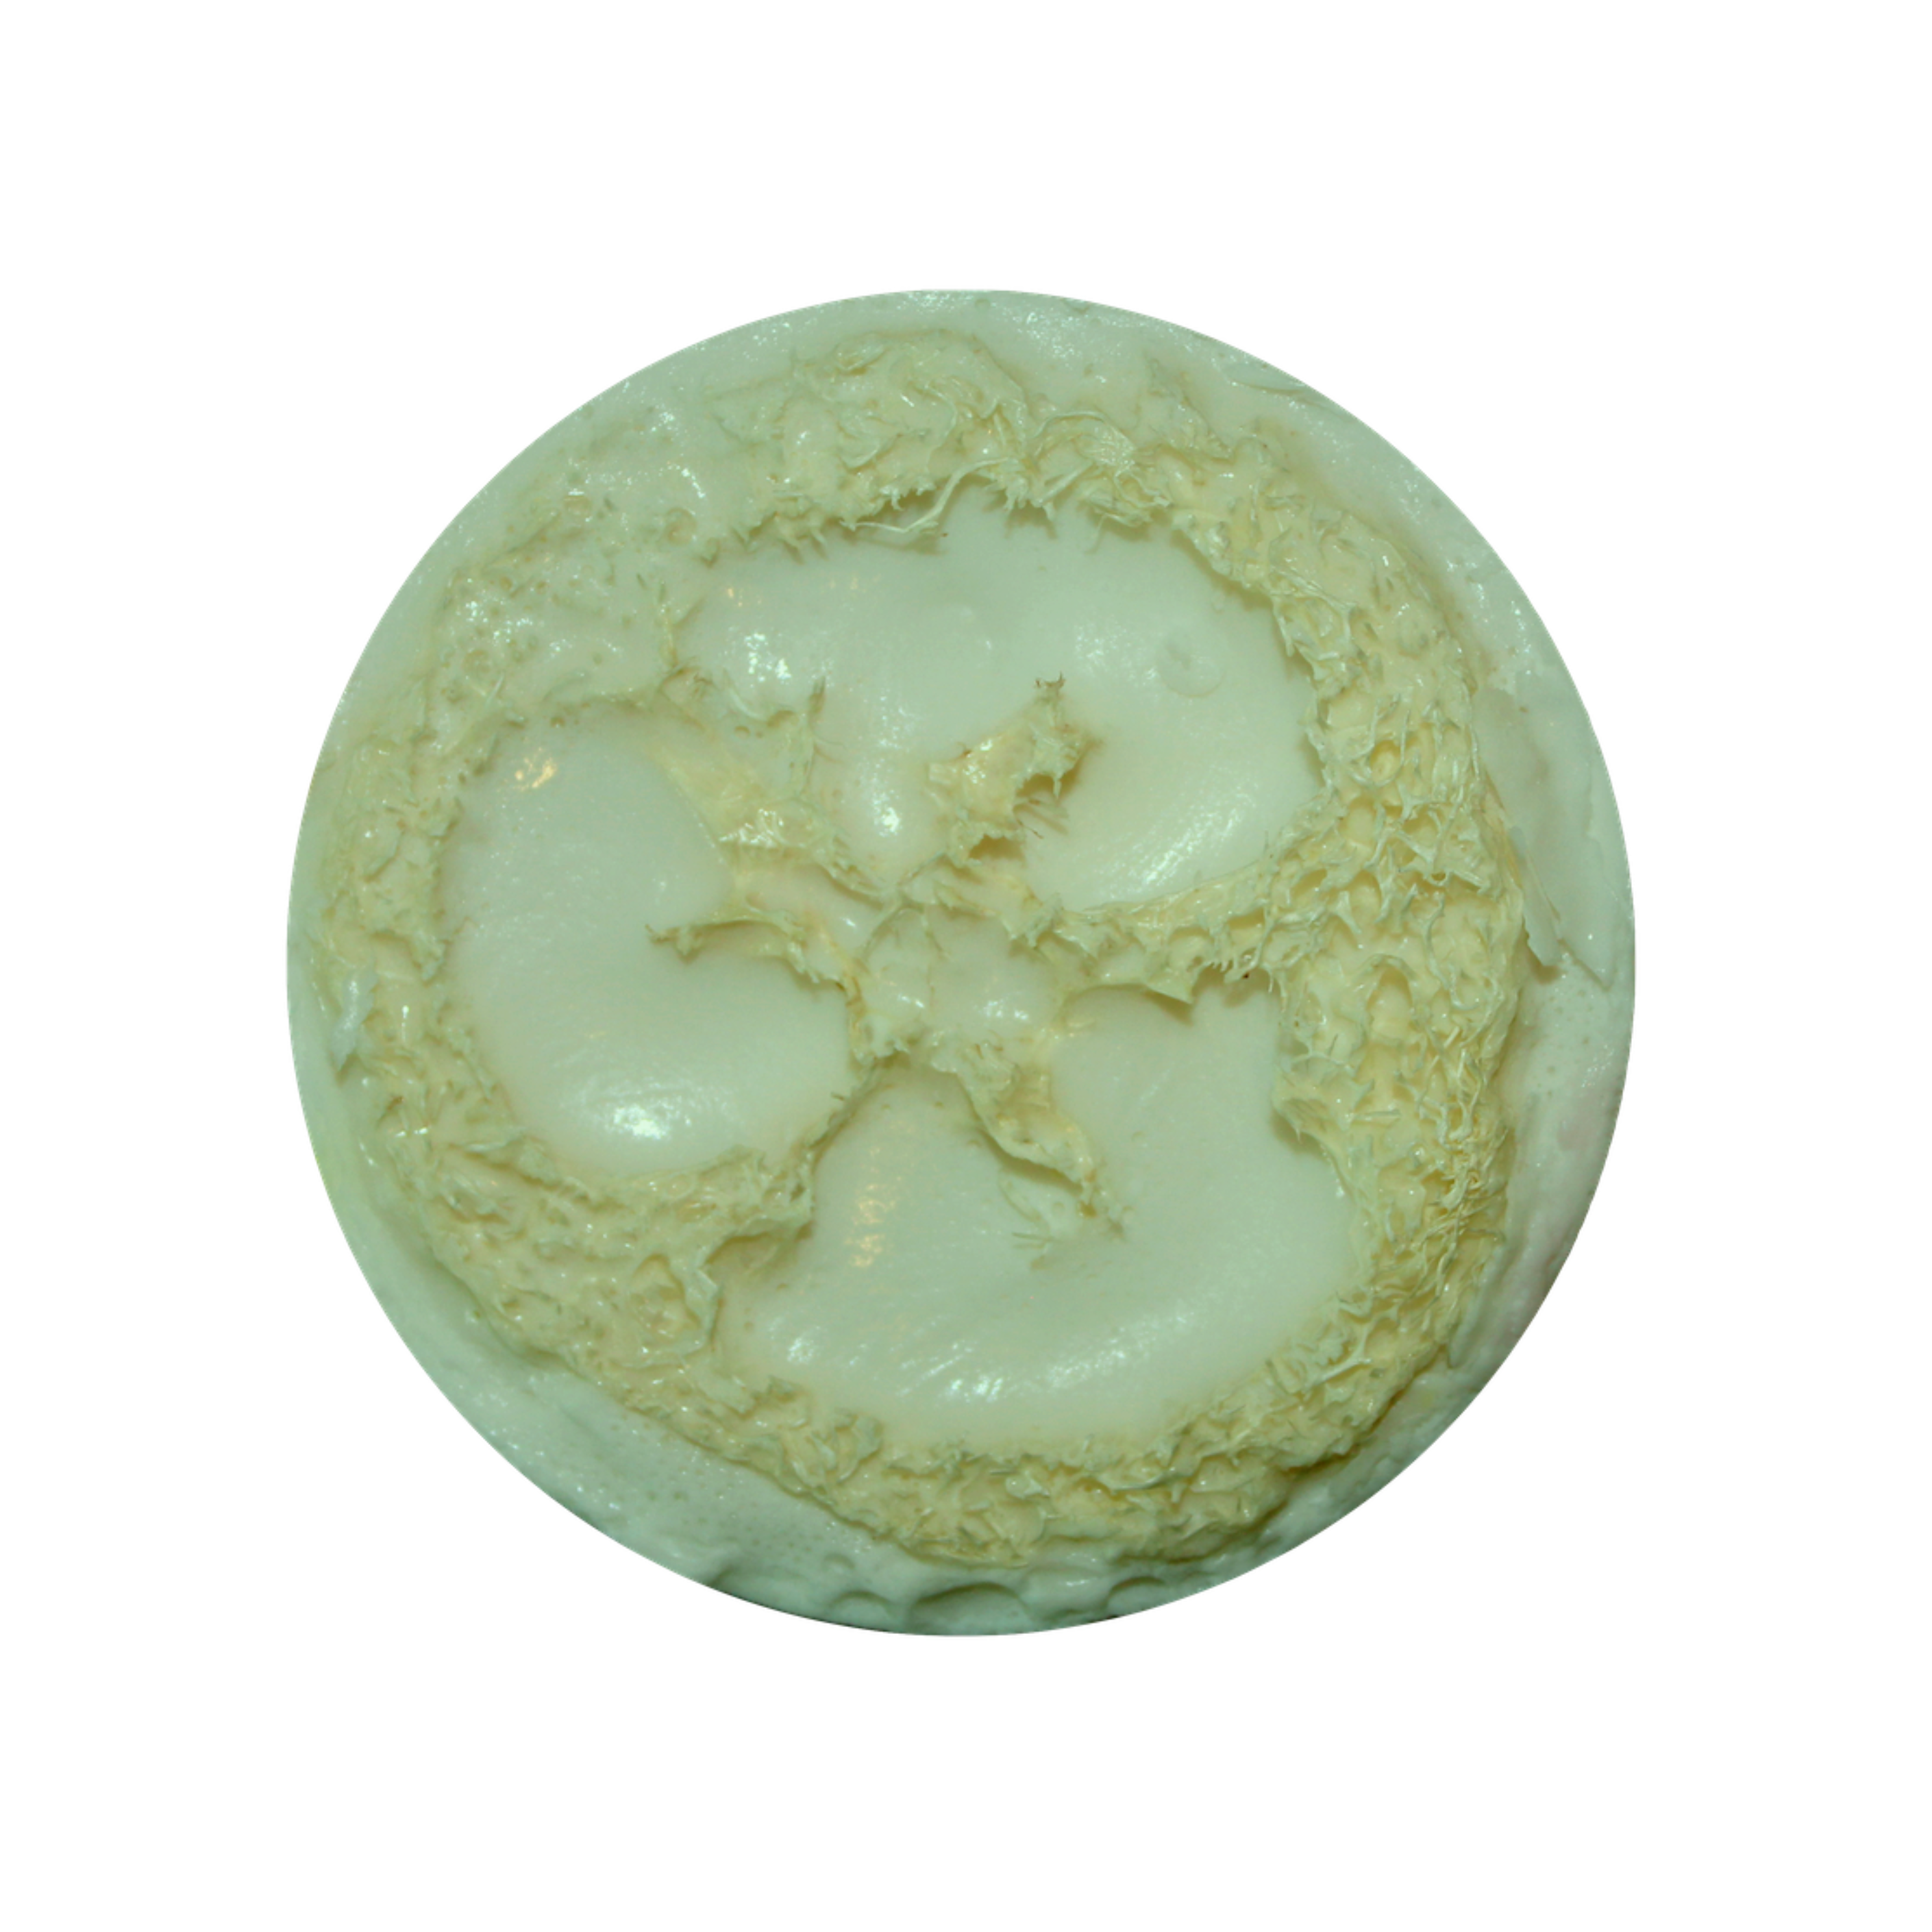 fresh lemongrass loofah soap is a great sustainable beauty product option for your spa &salon. It made with natural biodegradable loofah with soap, making it a convenient daily exfoliator for dry to normal skin. 